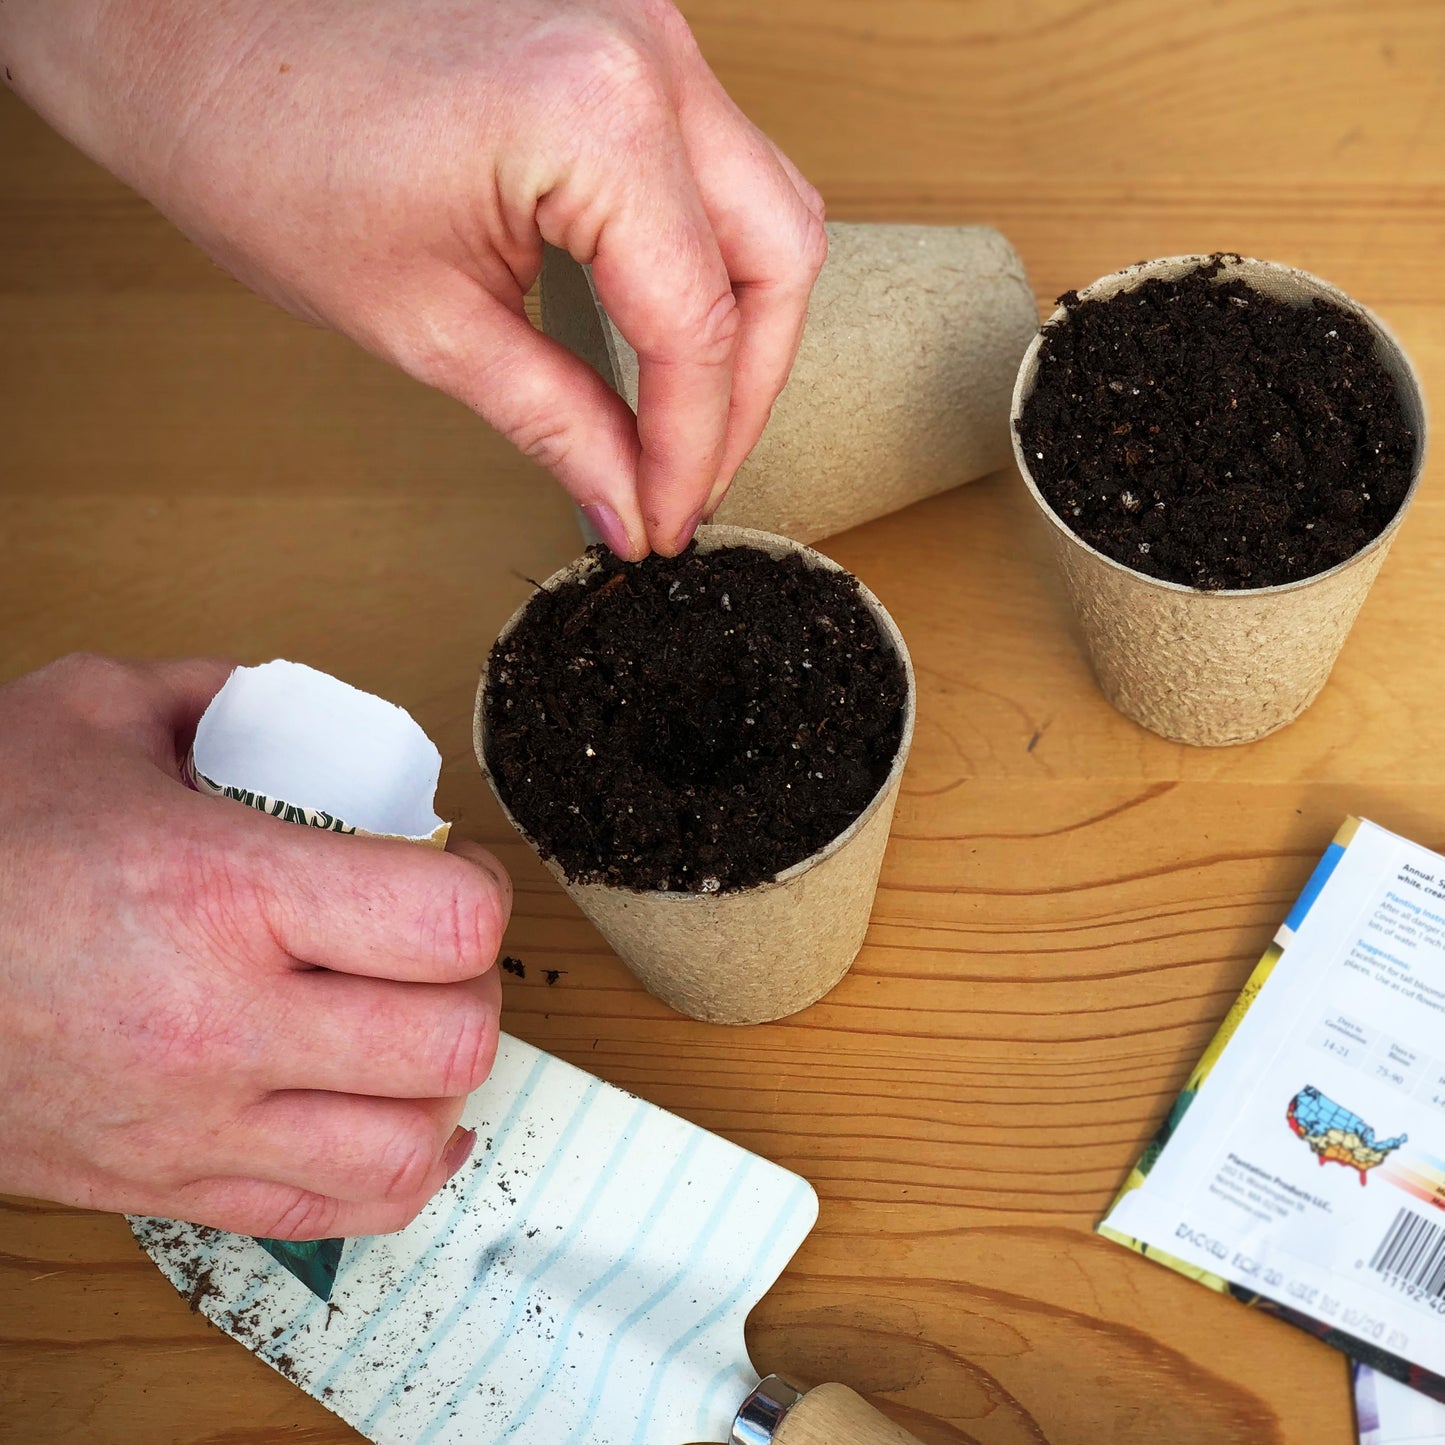 Start Sugar Baby Heirloom Watermelon seeds in biodegradable paper or peat pots.